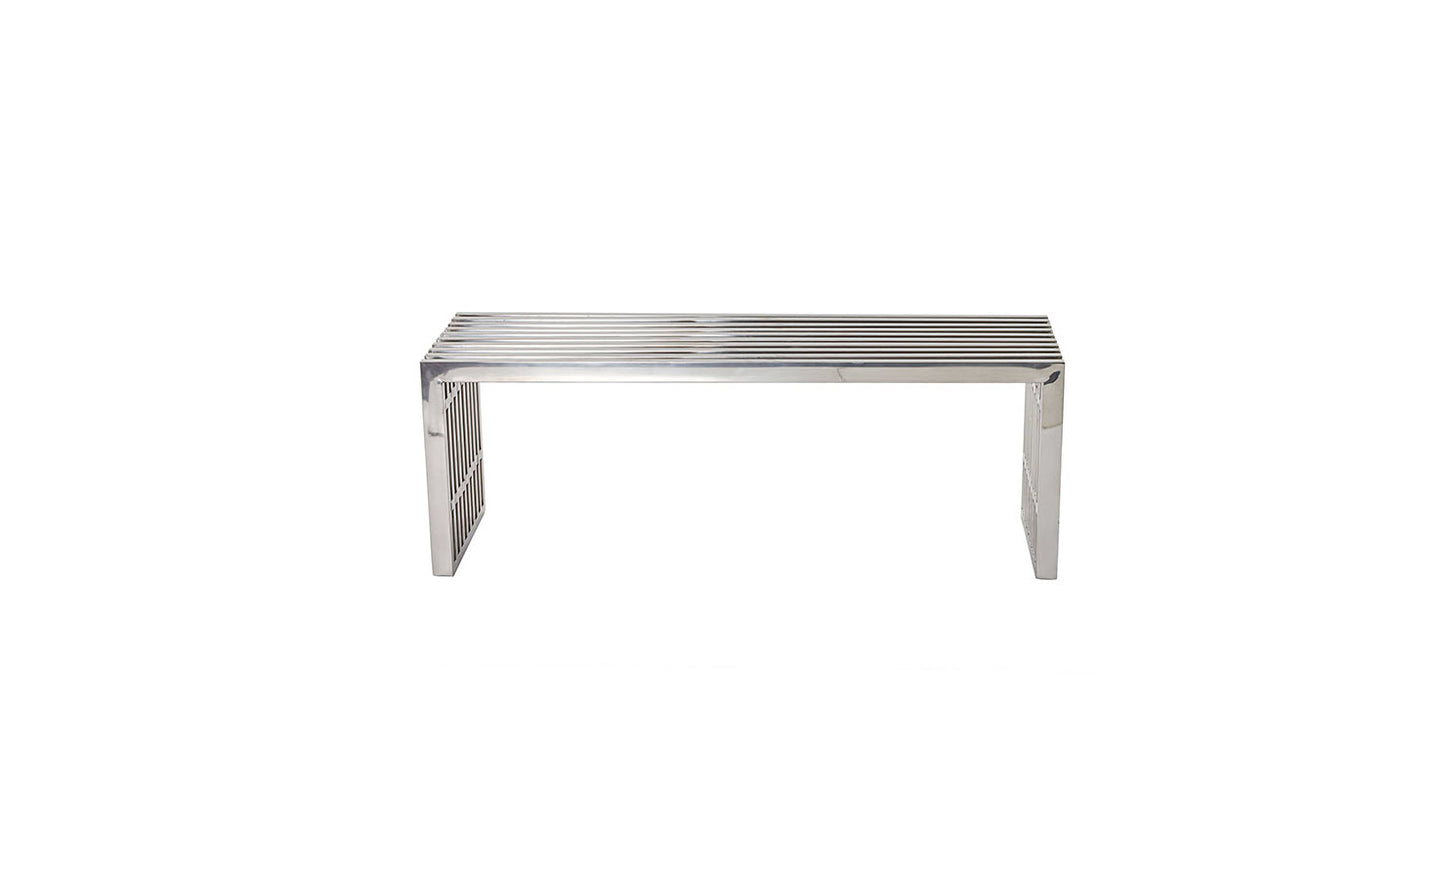 46" Stainless Steel Bench